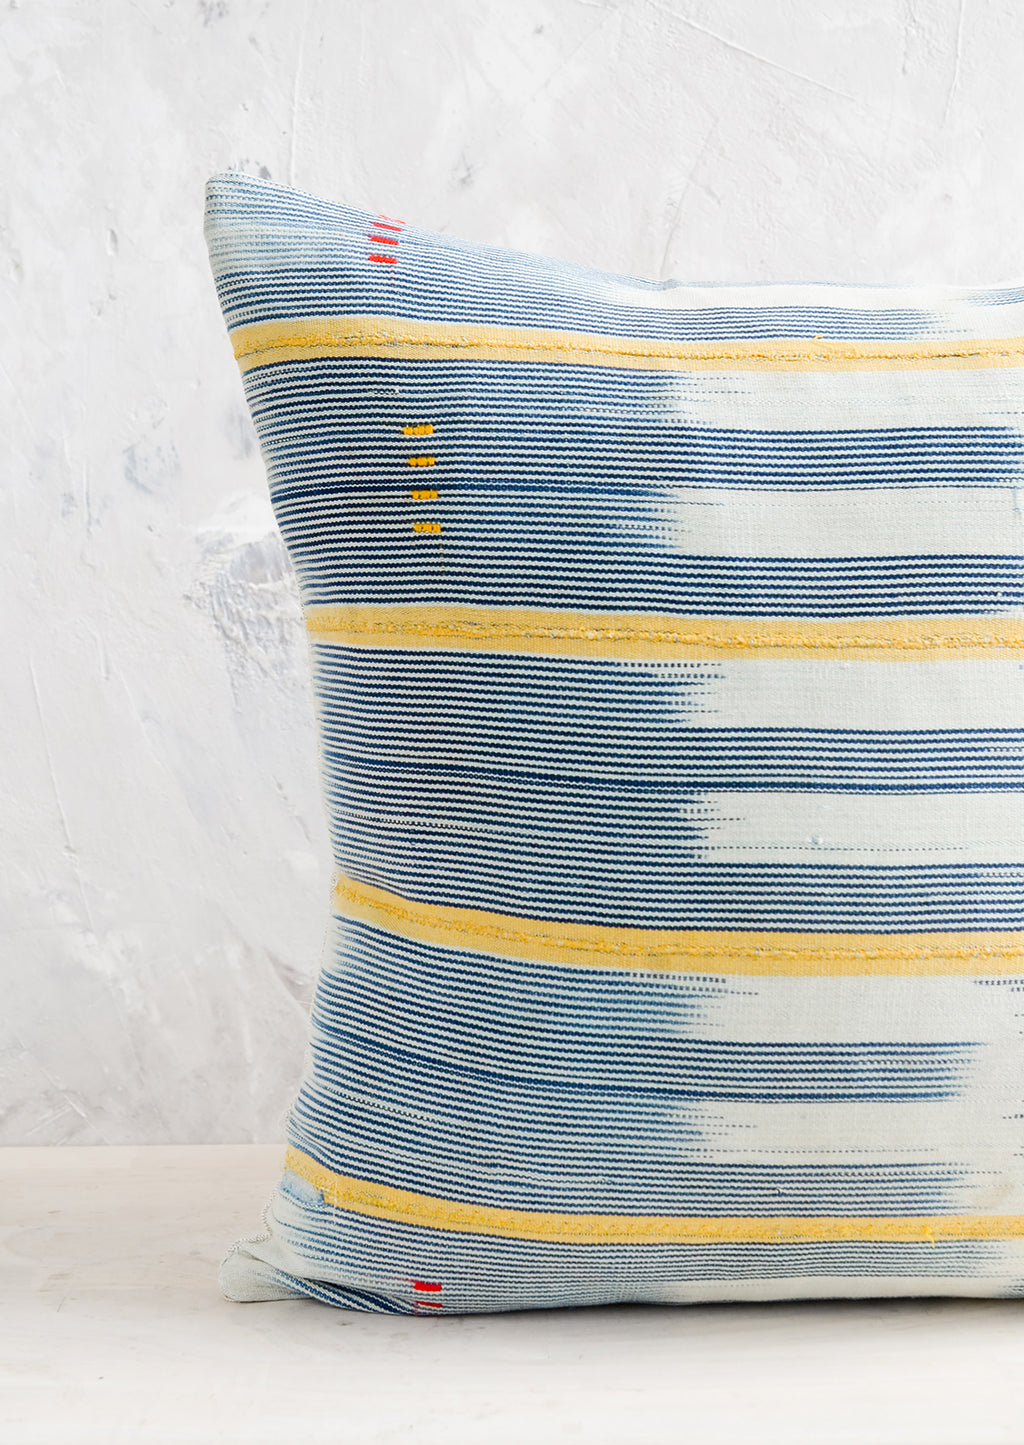 2: A square throw pillow in vintage African baule indigo ikat fabric with yellow accents.